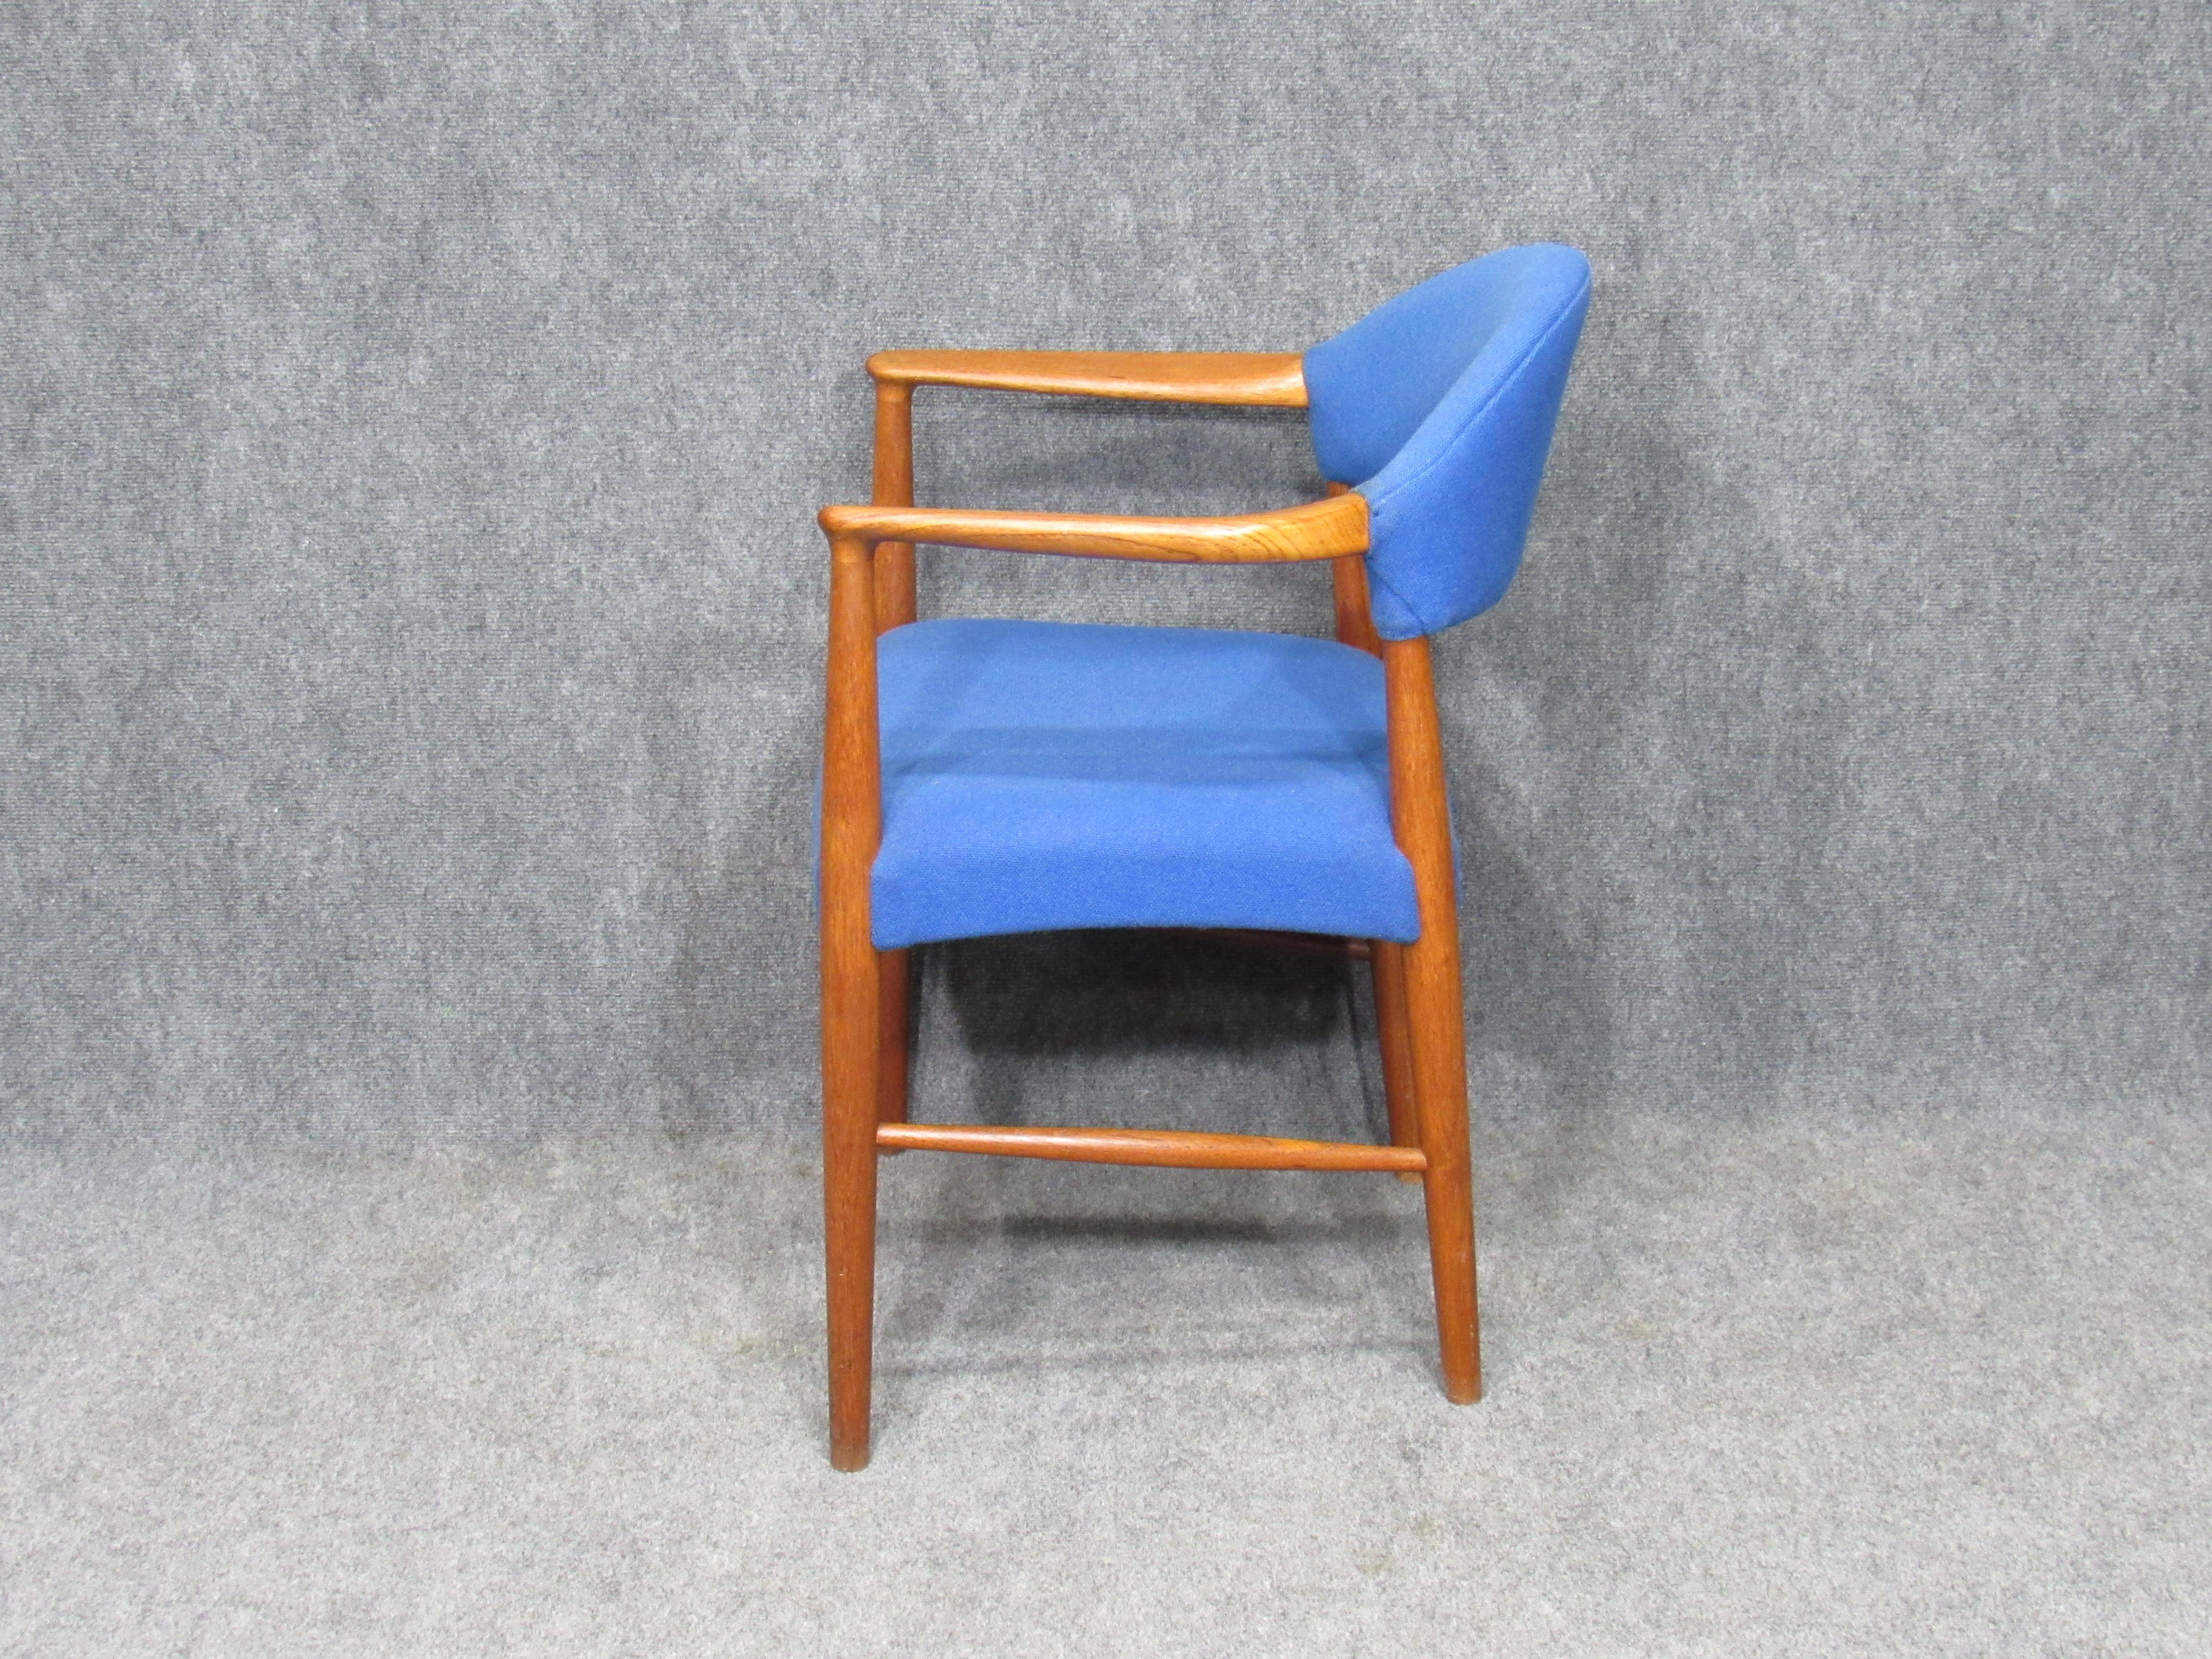 Danish Mid-Century Modern Teak Armchair Attrib. to Hans Wegner '10 Available' In Good Condition For Sale In Belmont, MA